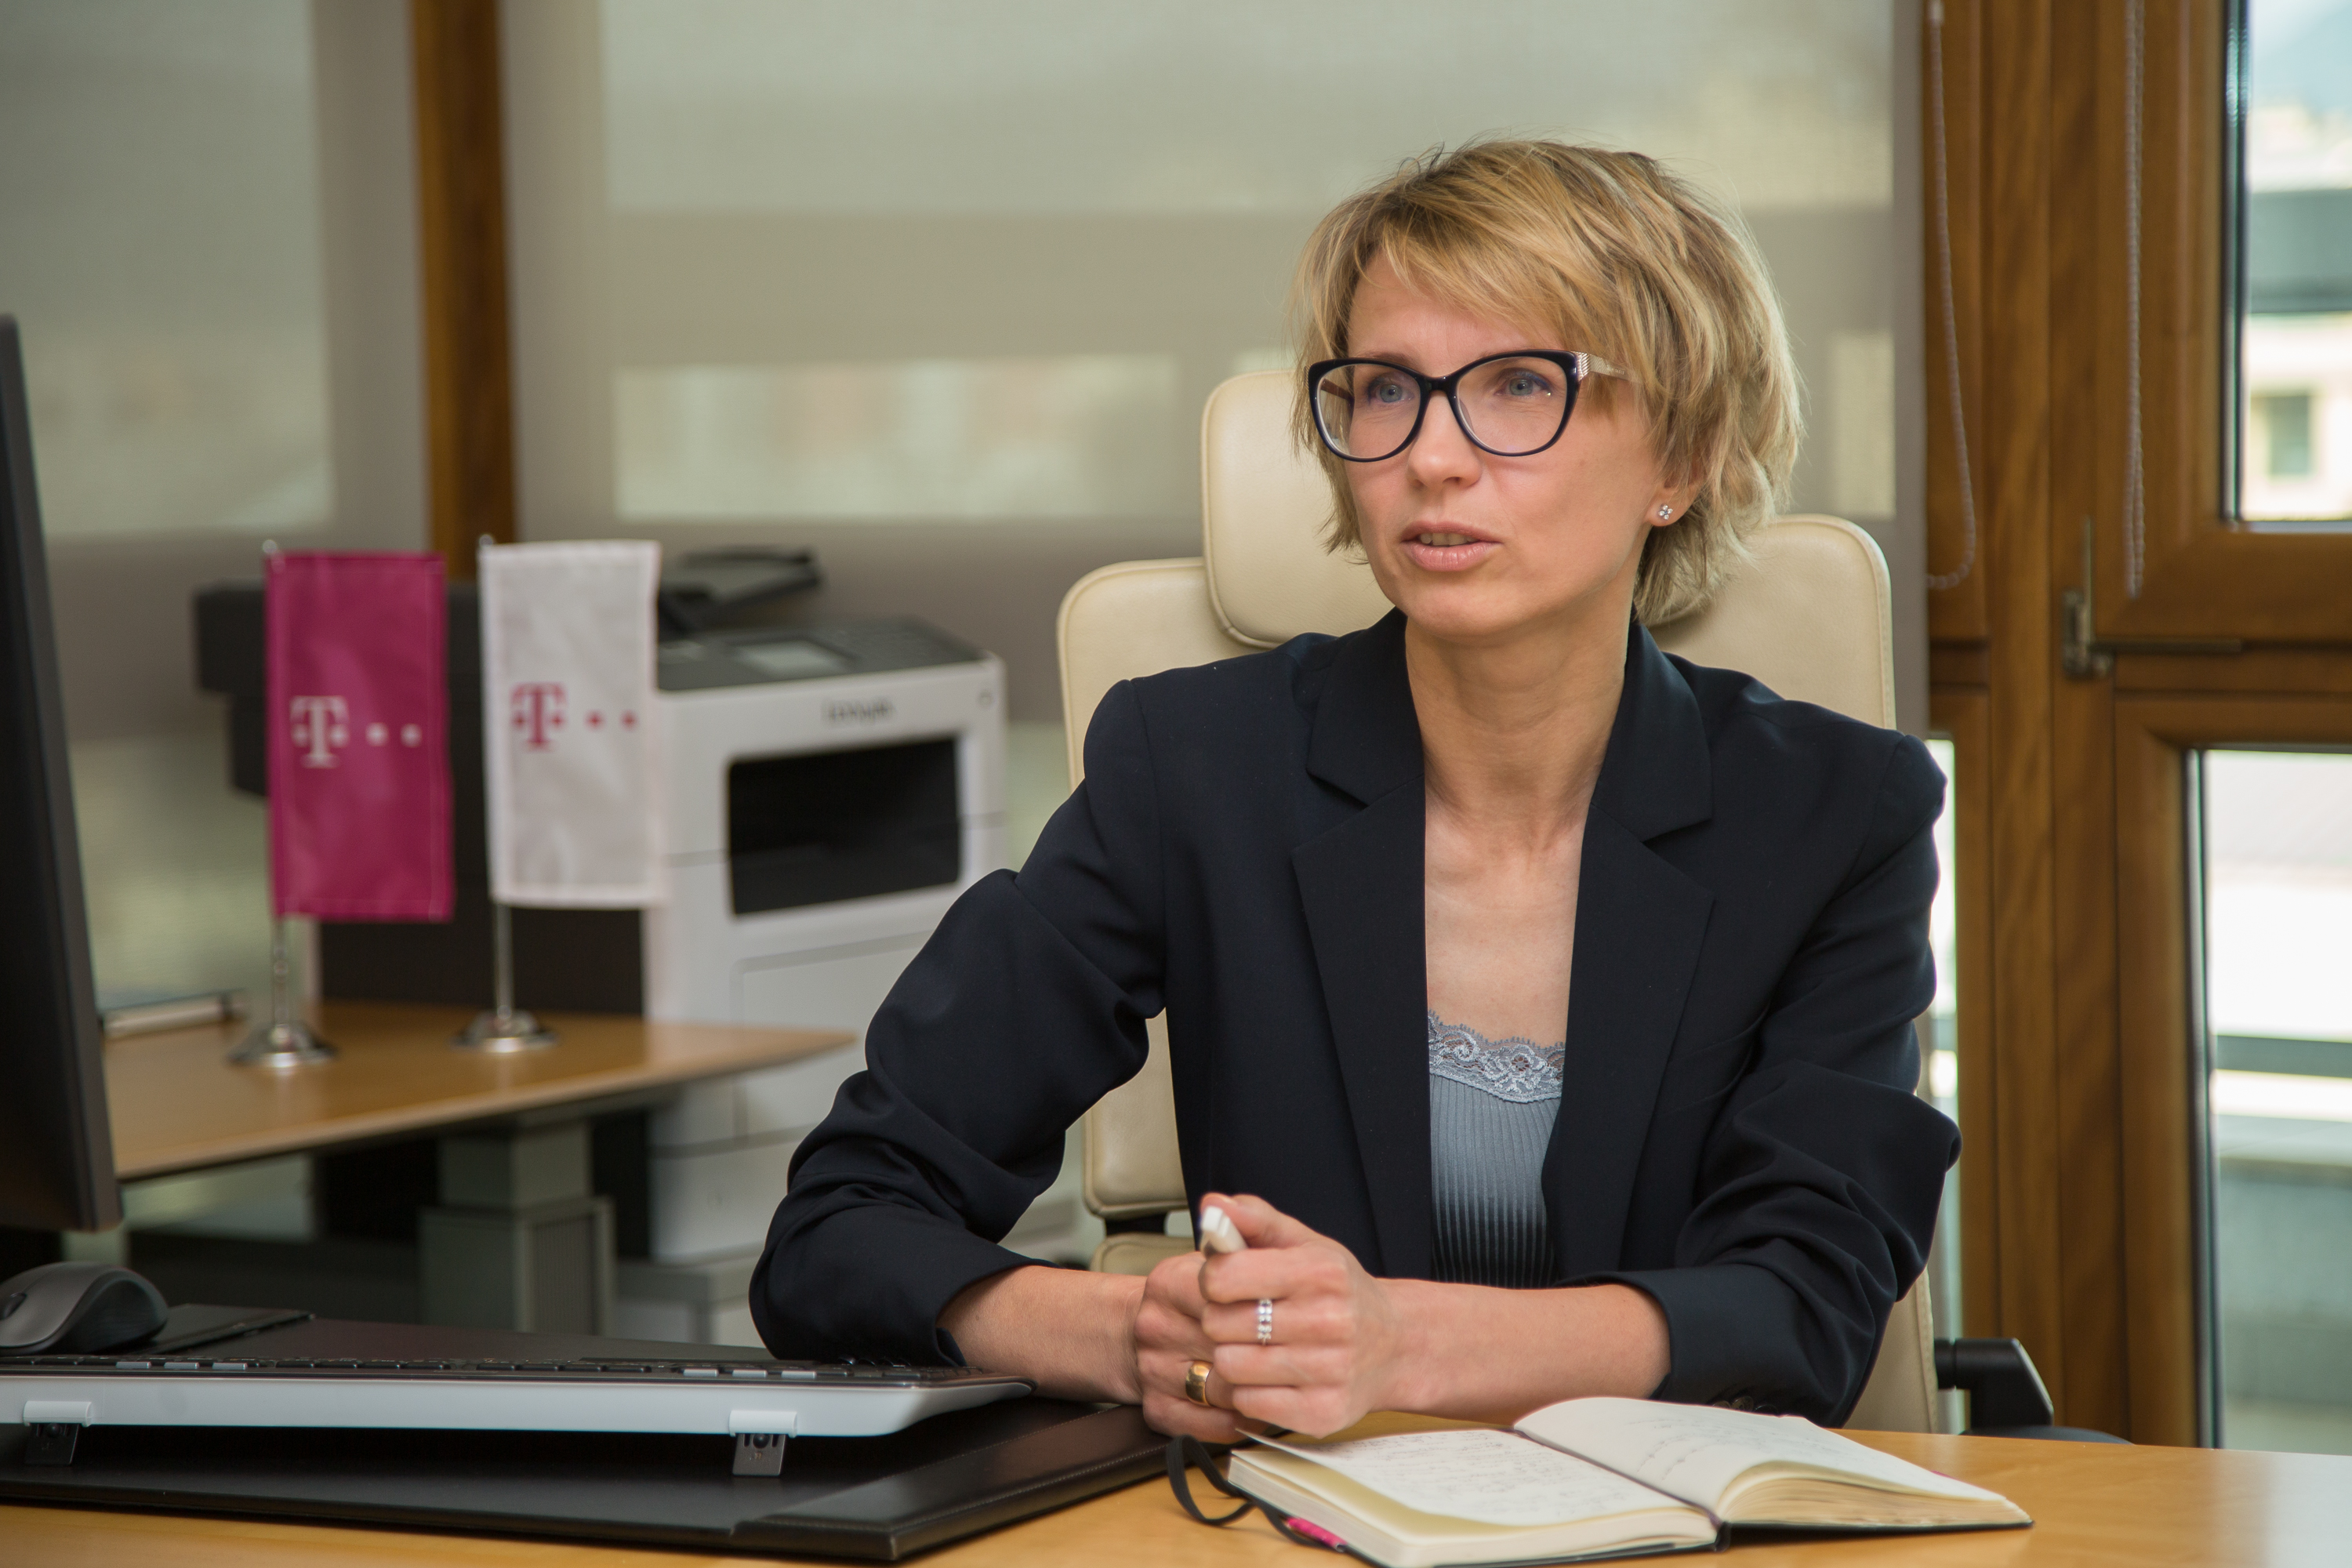 Dina Tsybulskaya is appointed CEO of Telekom Romania Mobile Communications starting September 1st, 2021